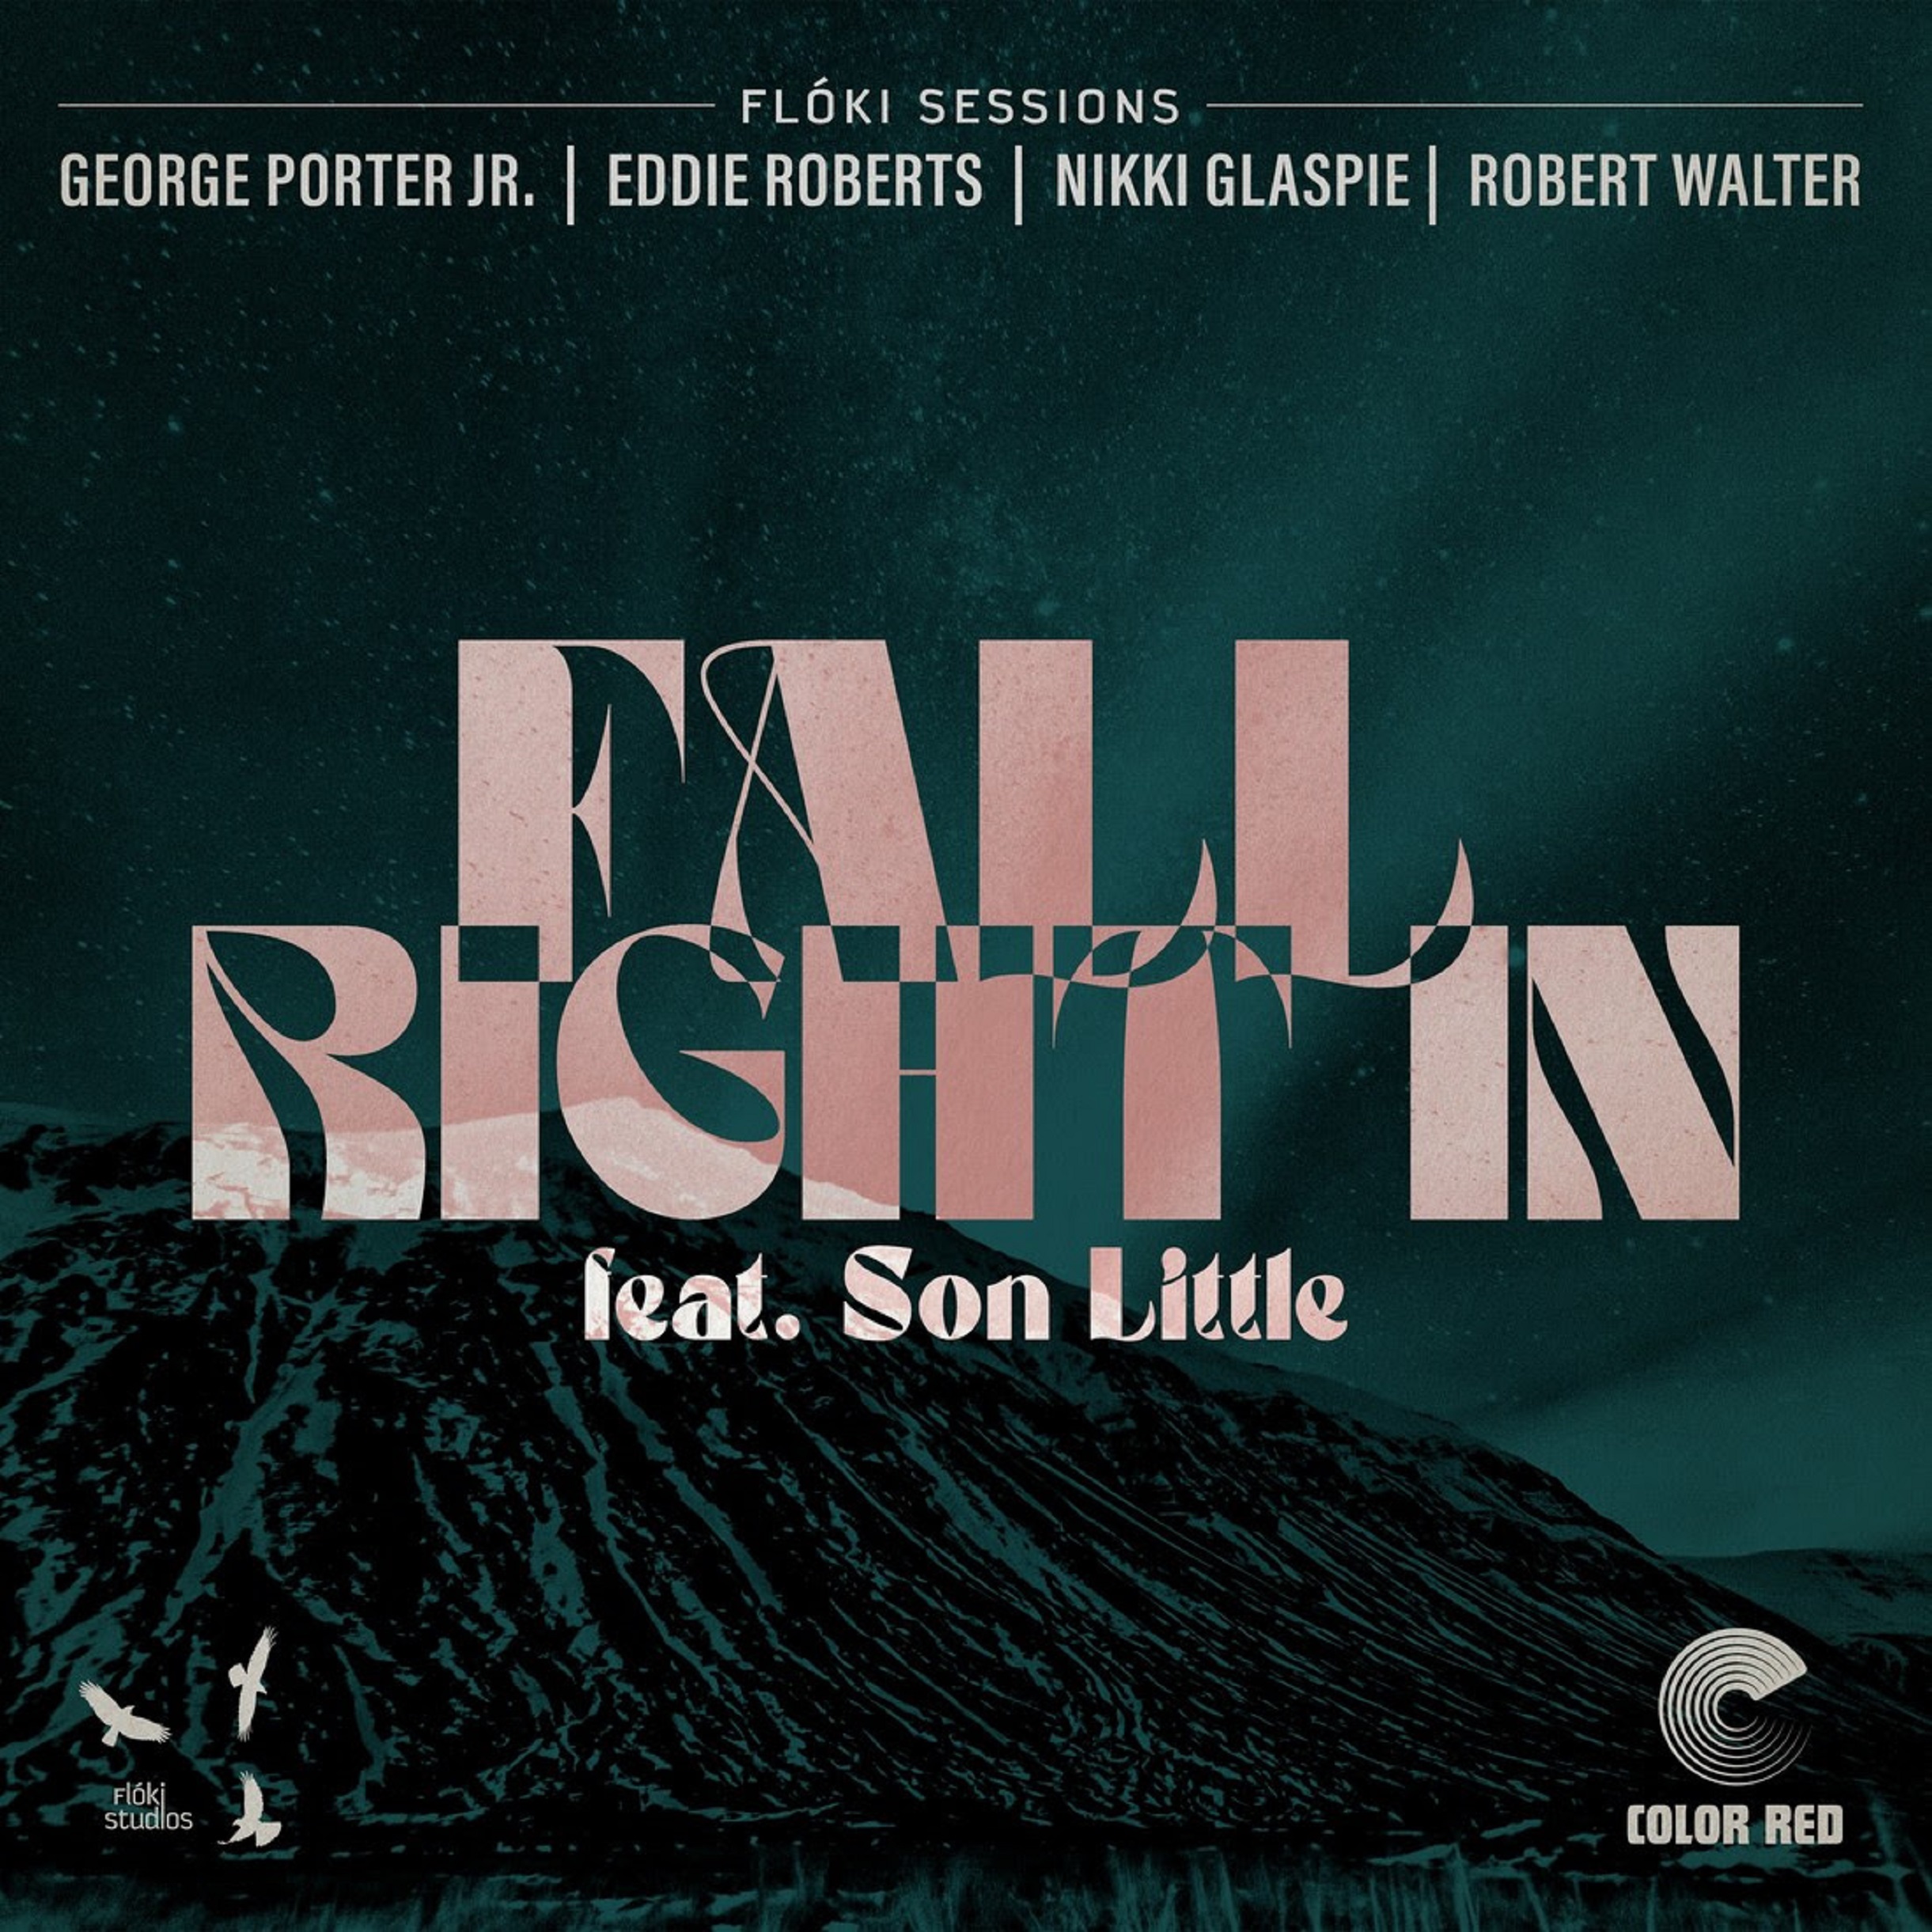 Son Little Joins George Porter Jr., Eddie Roberts, Robert Walter & Nikki Glaspie in New Single "Fall Right In"